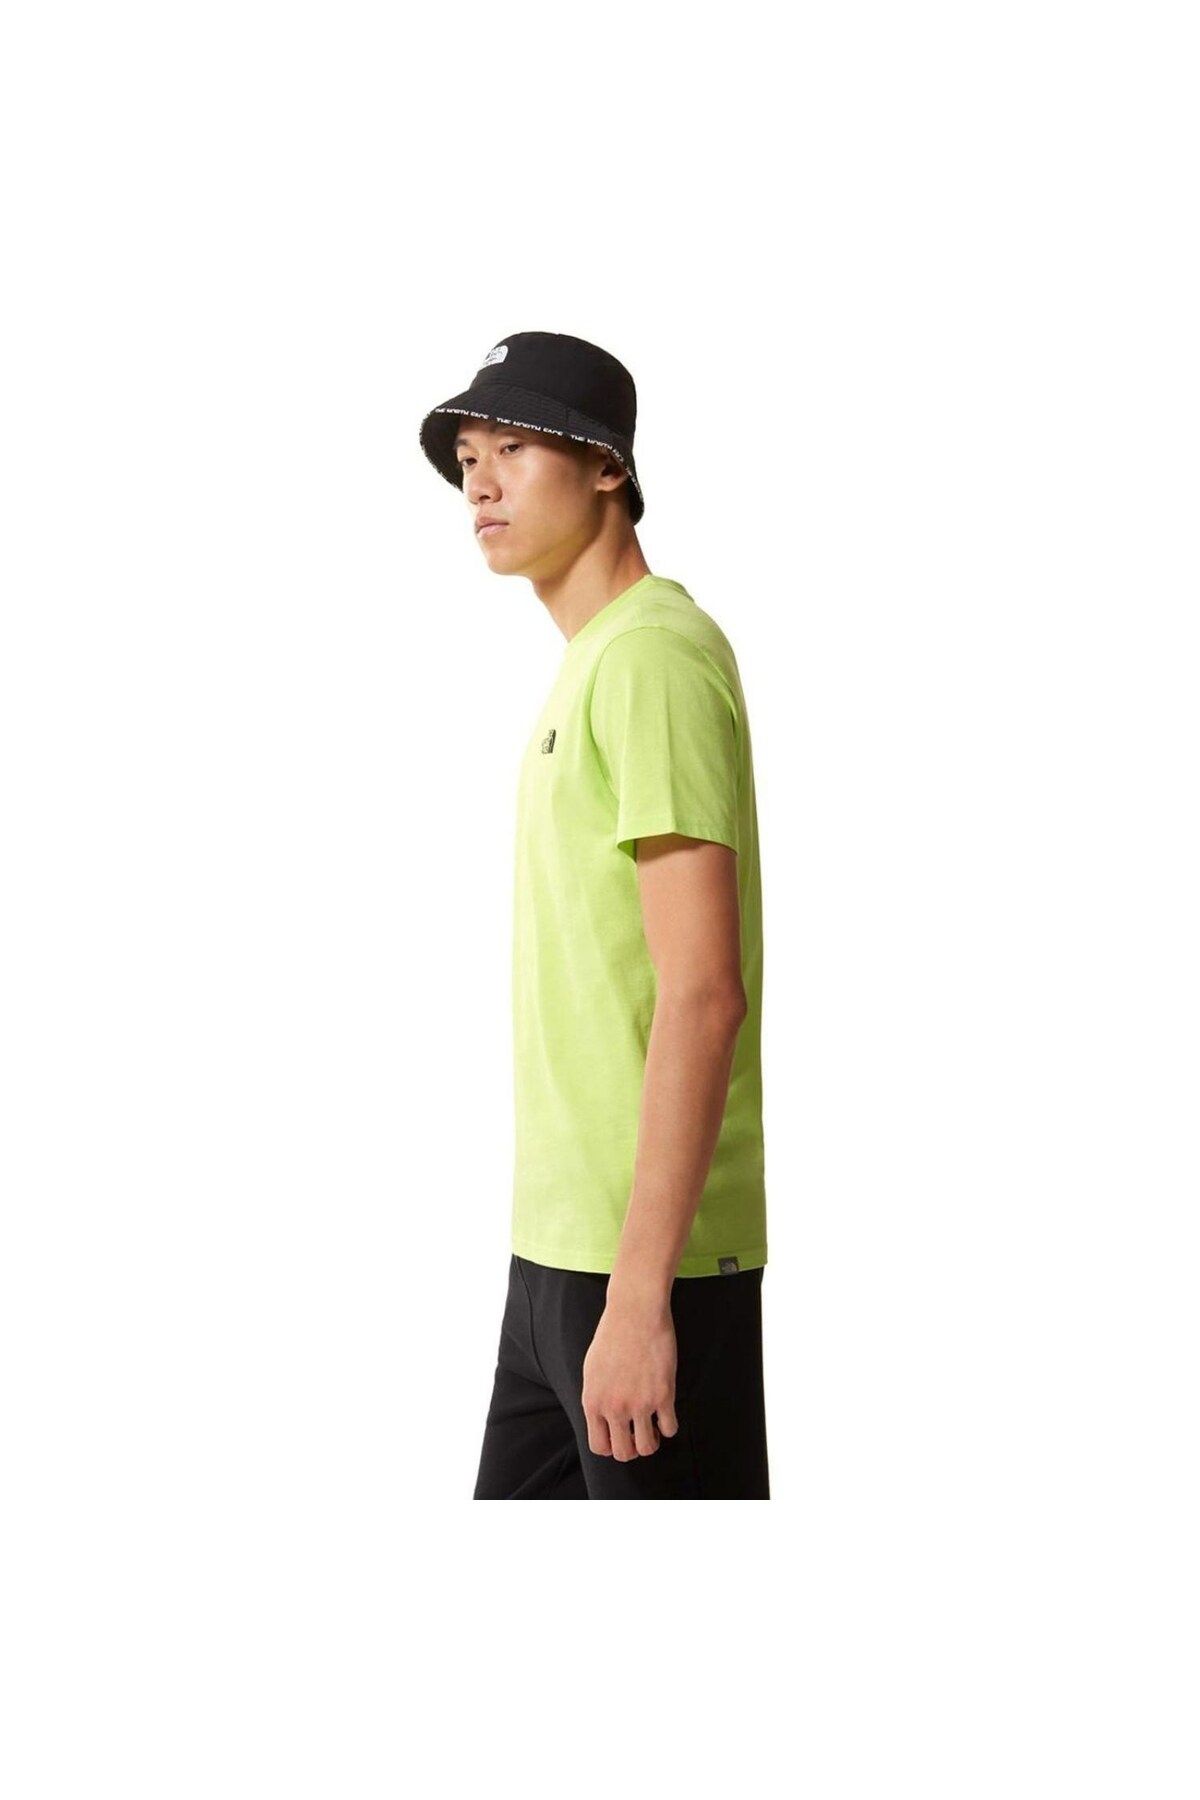 THE NORTH FACE Men's S/S Simple Dome Tee - White